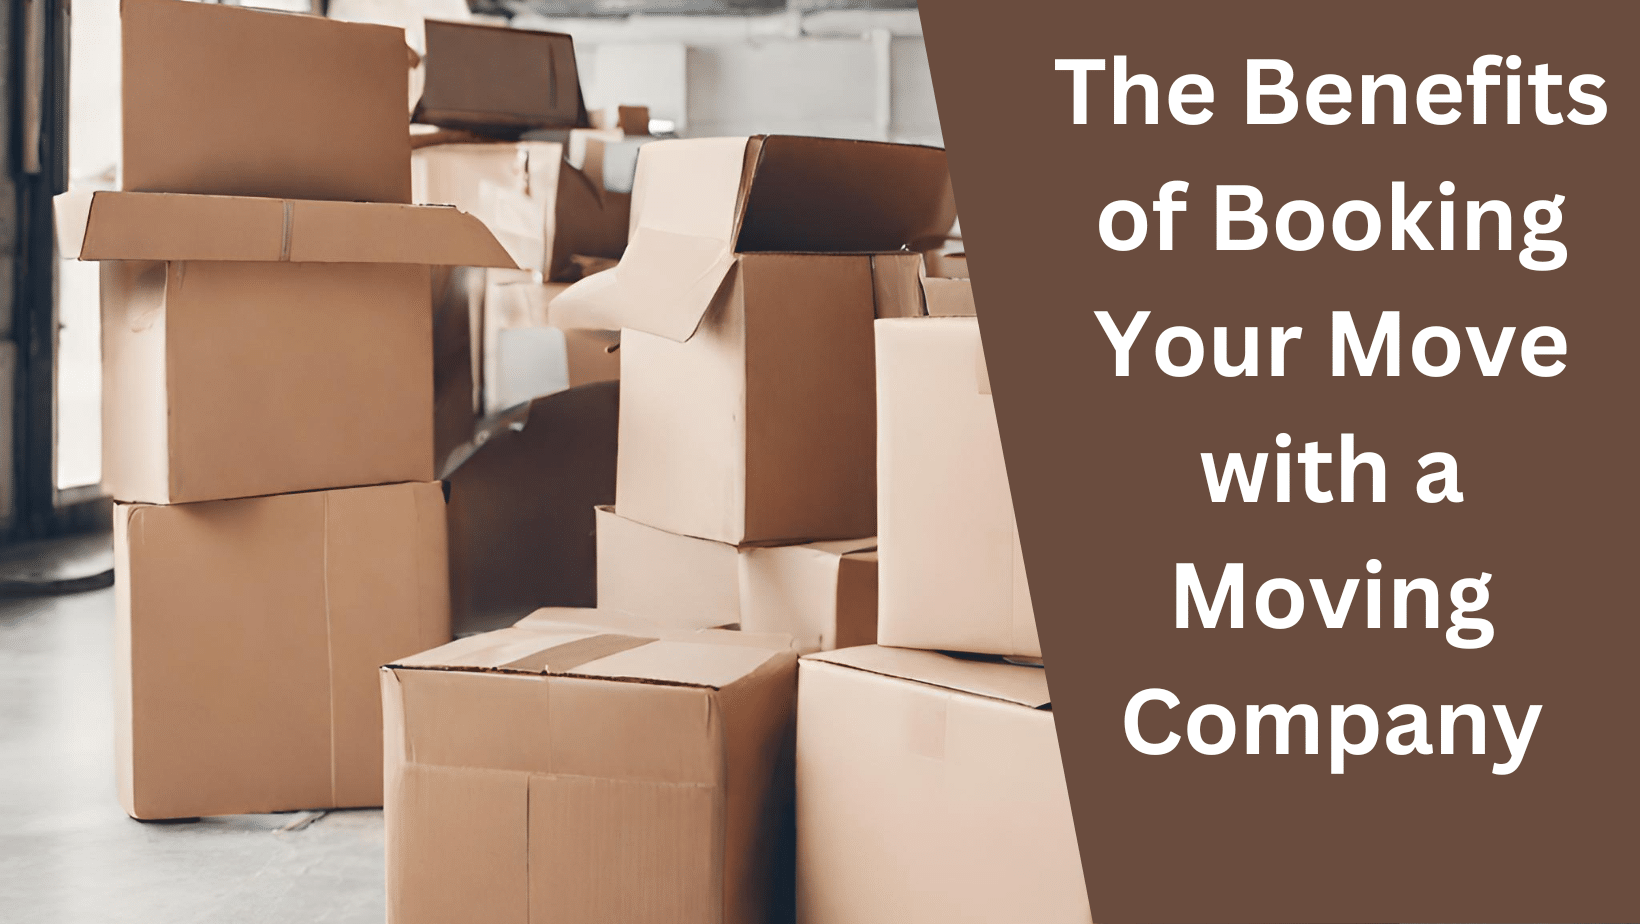 The Benefits of Booking Your Move with a Moving Company